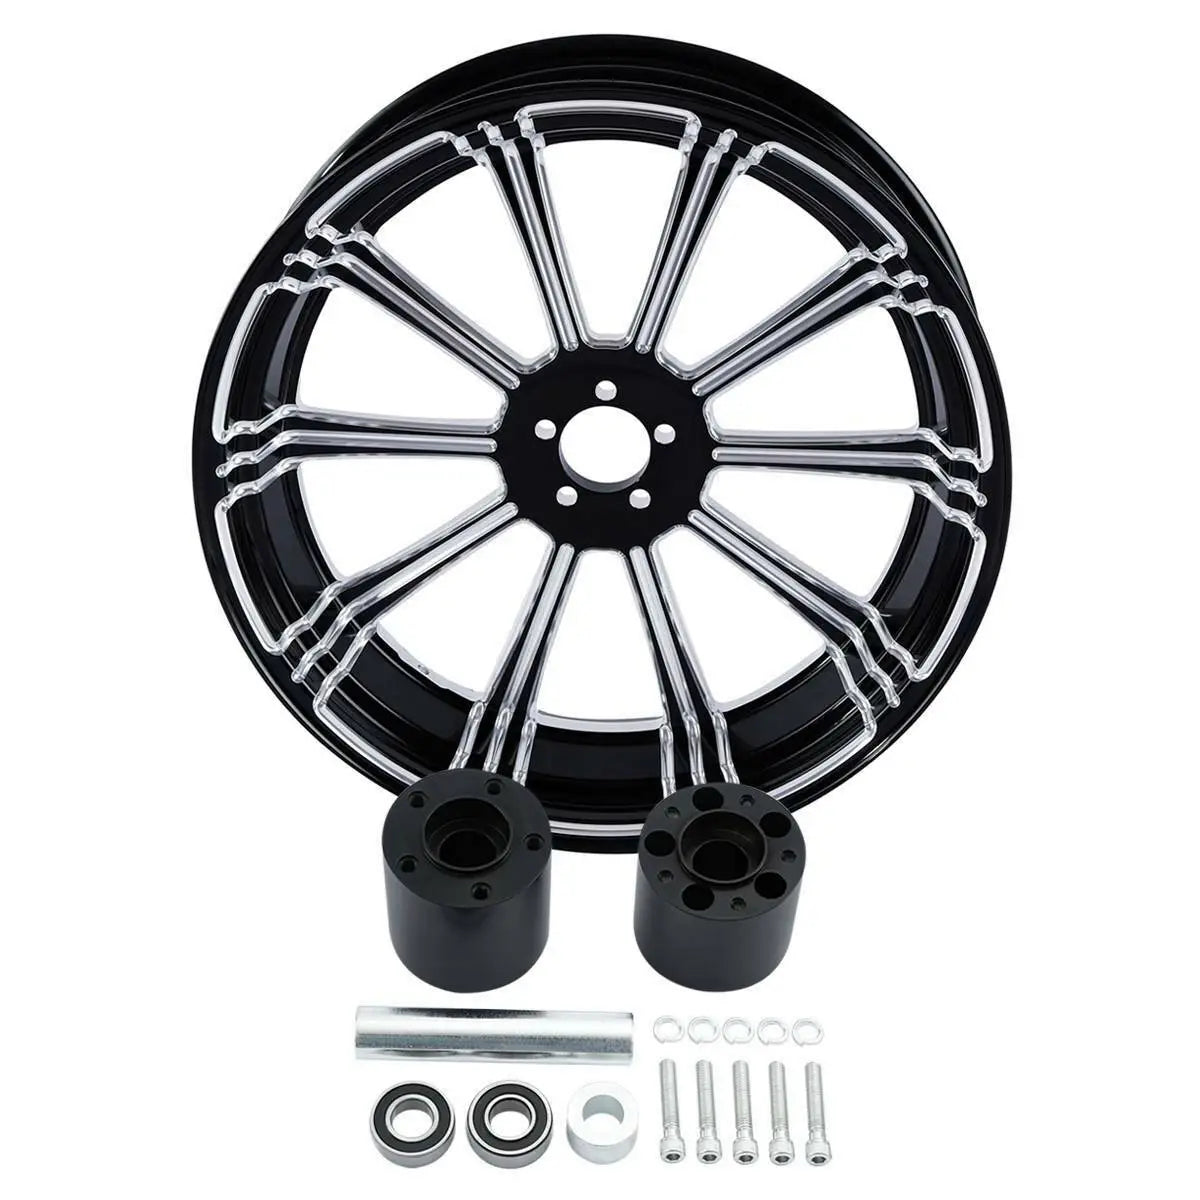 Voodoo Cycle House Custom 18" x 5.5" Rear Wheel with Hub Assembly For Harley-Davidson & Custom Applications Touring Models Non ABS 2009-2020 FLTR/FLHT/FLHR/FLHX